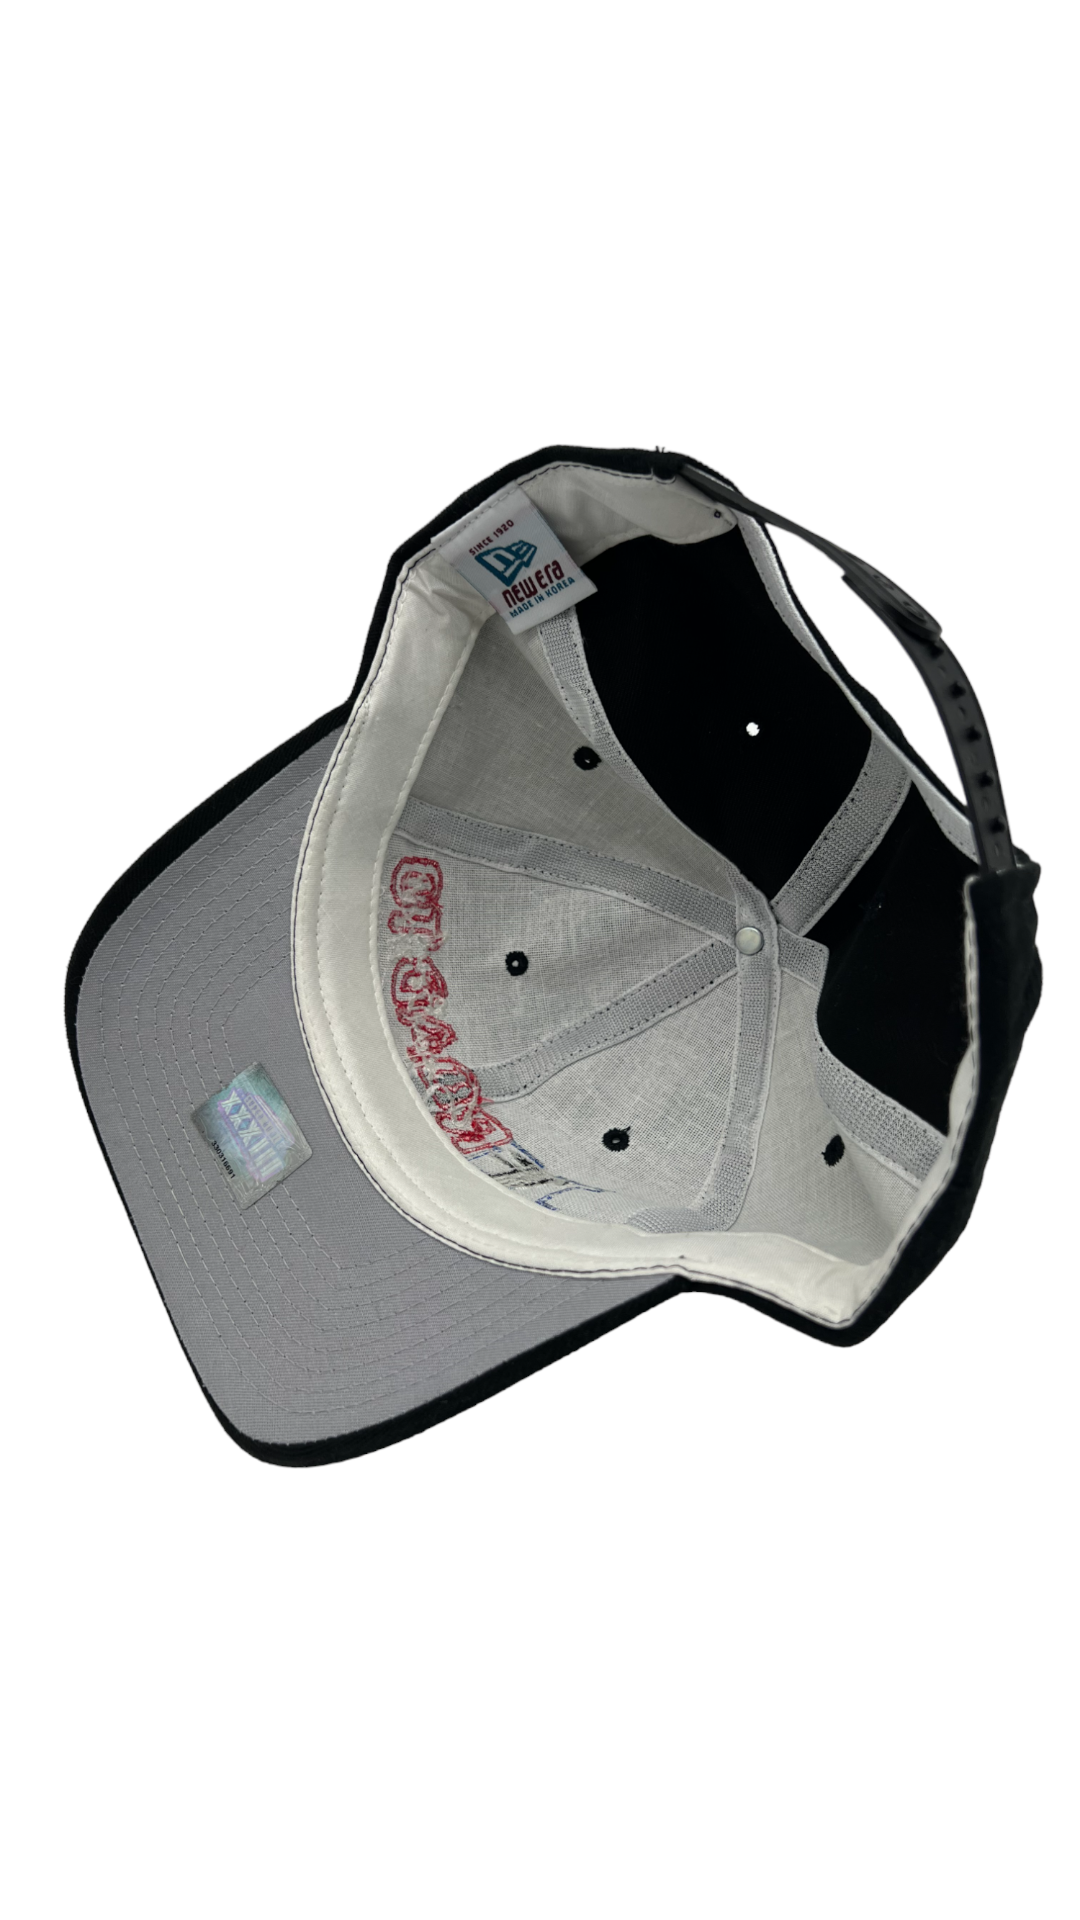 Load image into Gallery viewer, VTG Super Bowl XXXIII Snapback Hat
